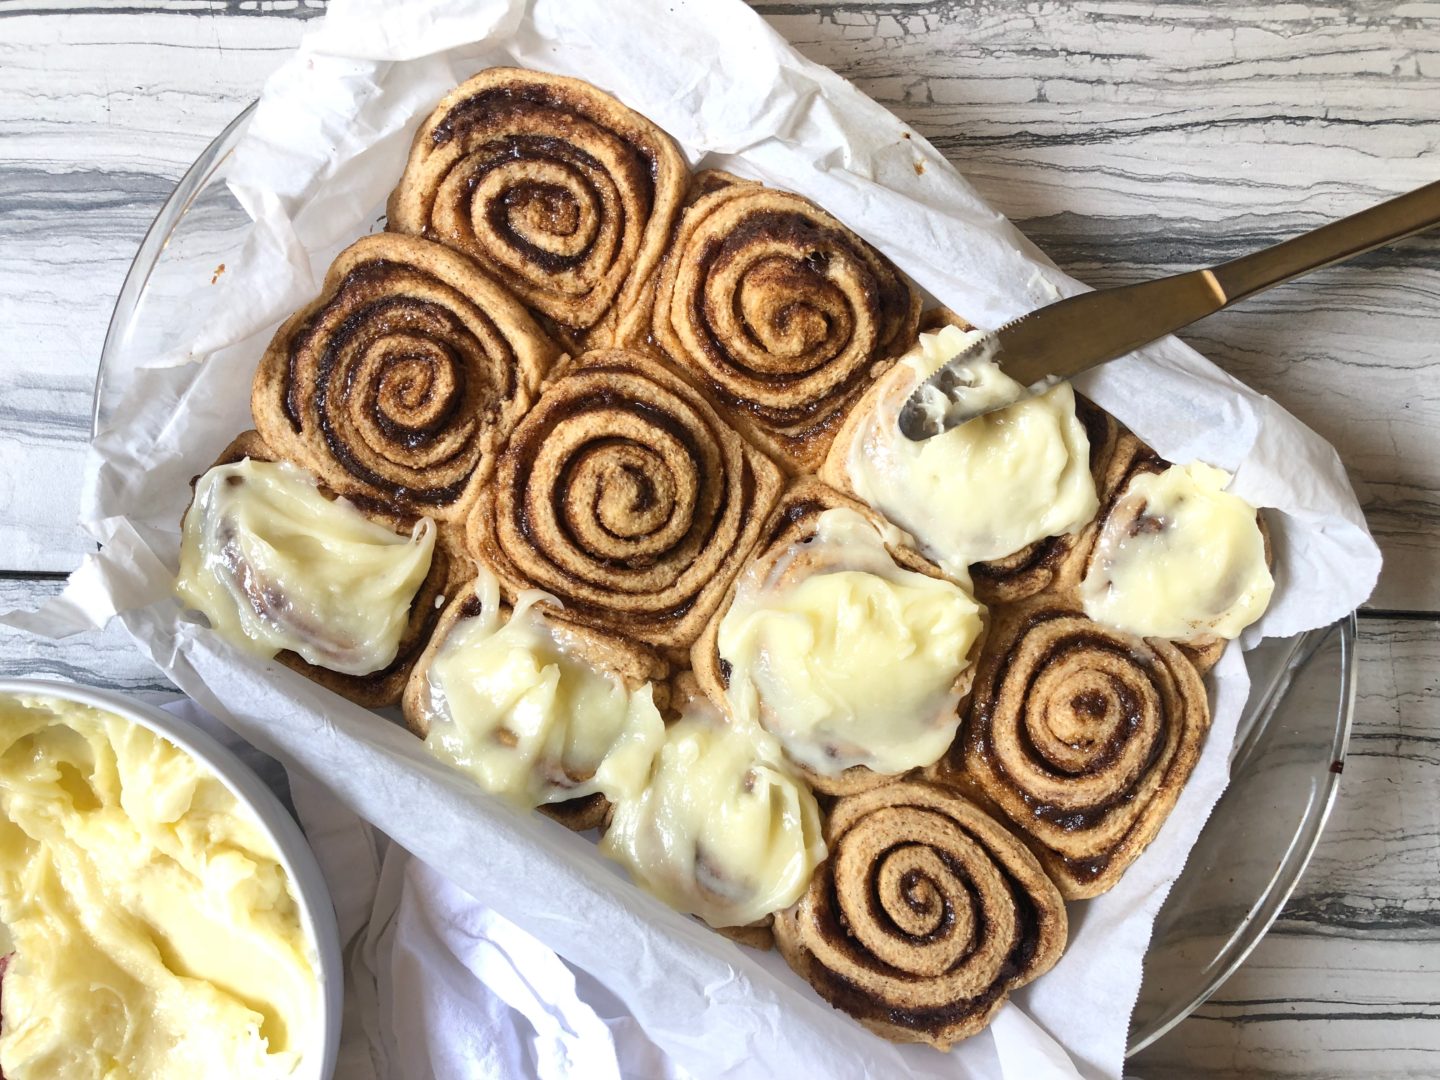 Lifestyle Blogger Chocolate & Lace shares her recipe for Cream Cheese Frosted Cinnamon Rolls.